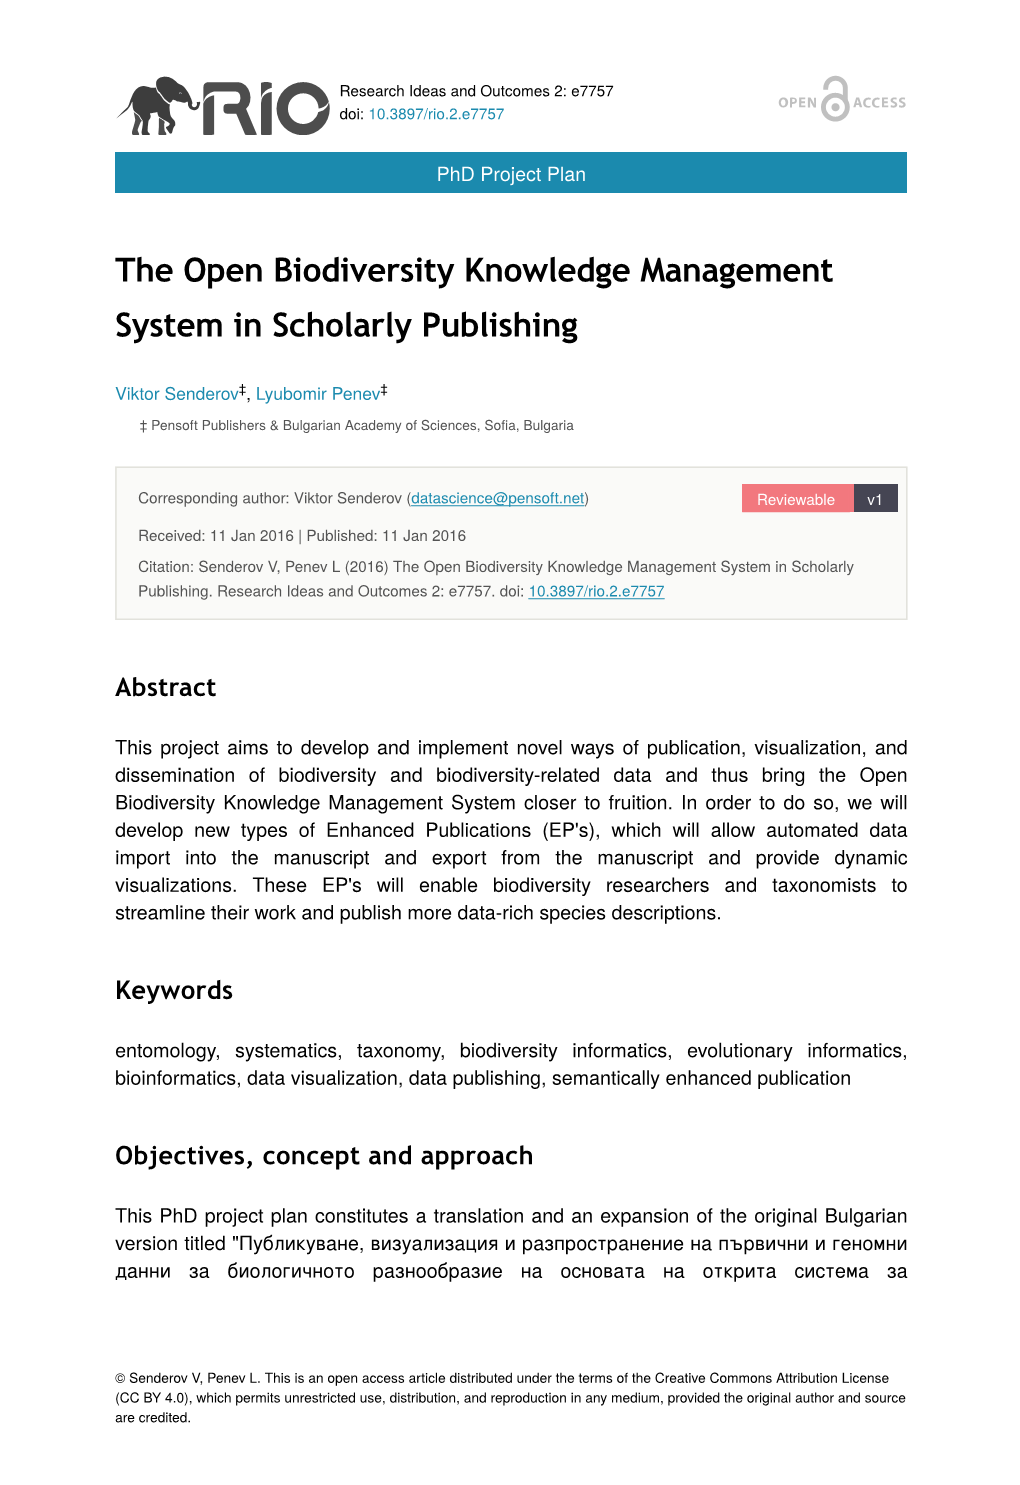 The Open Biodiversity Knowledge Management System in Scholarly Publishing